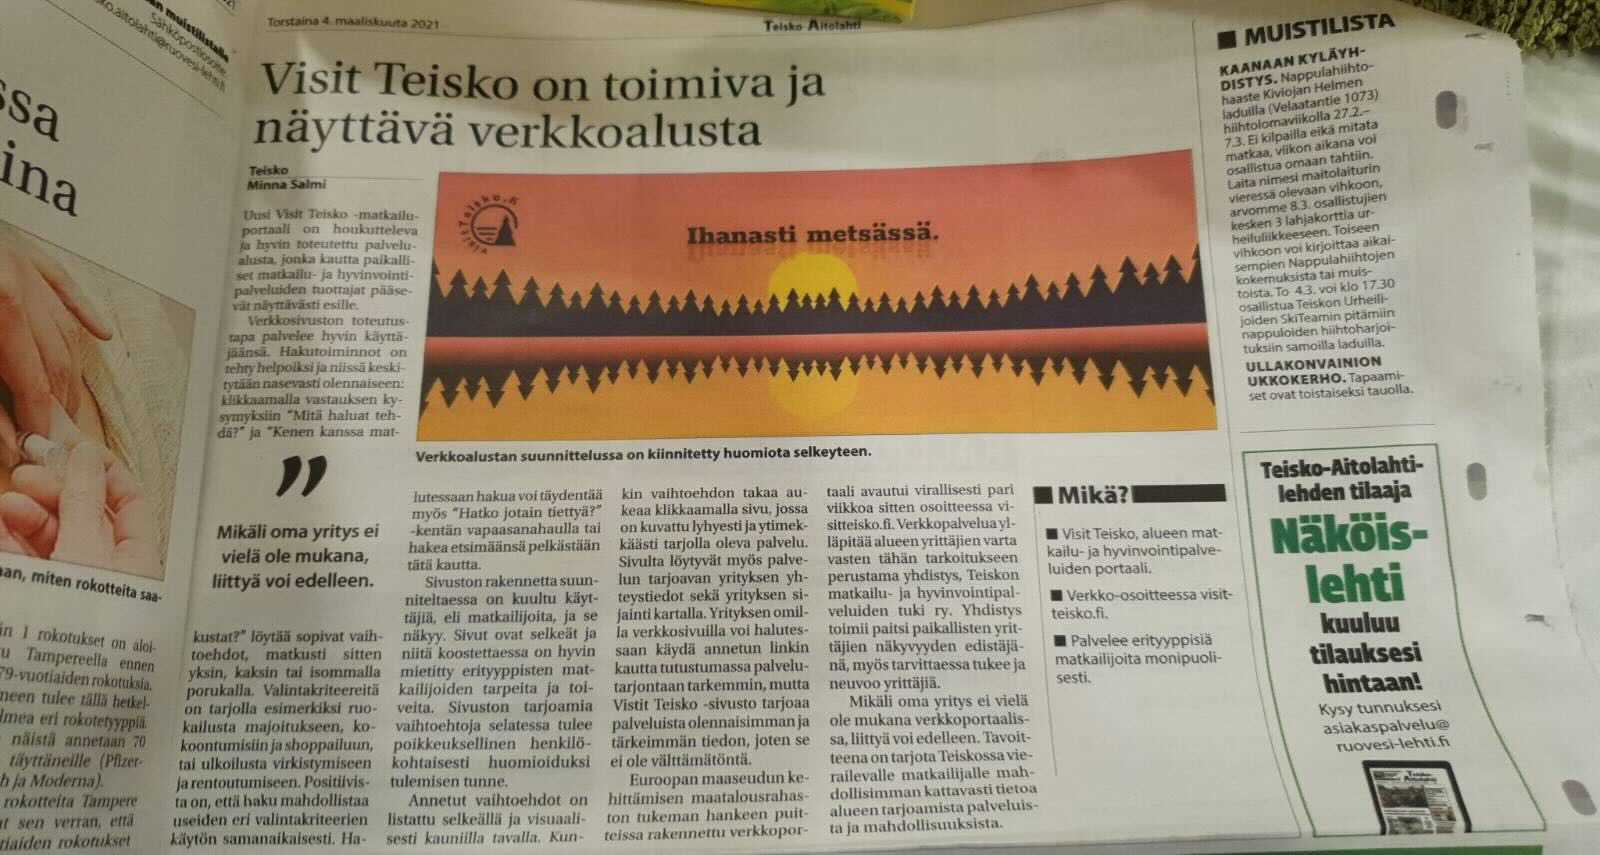 Visit Teisko featured on a local news paper